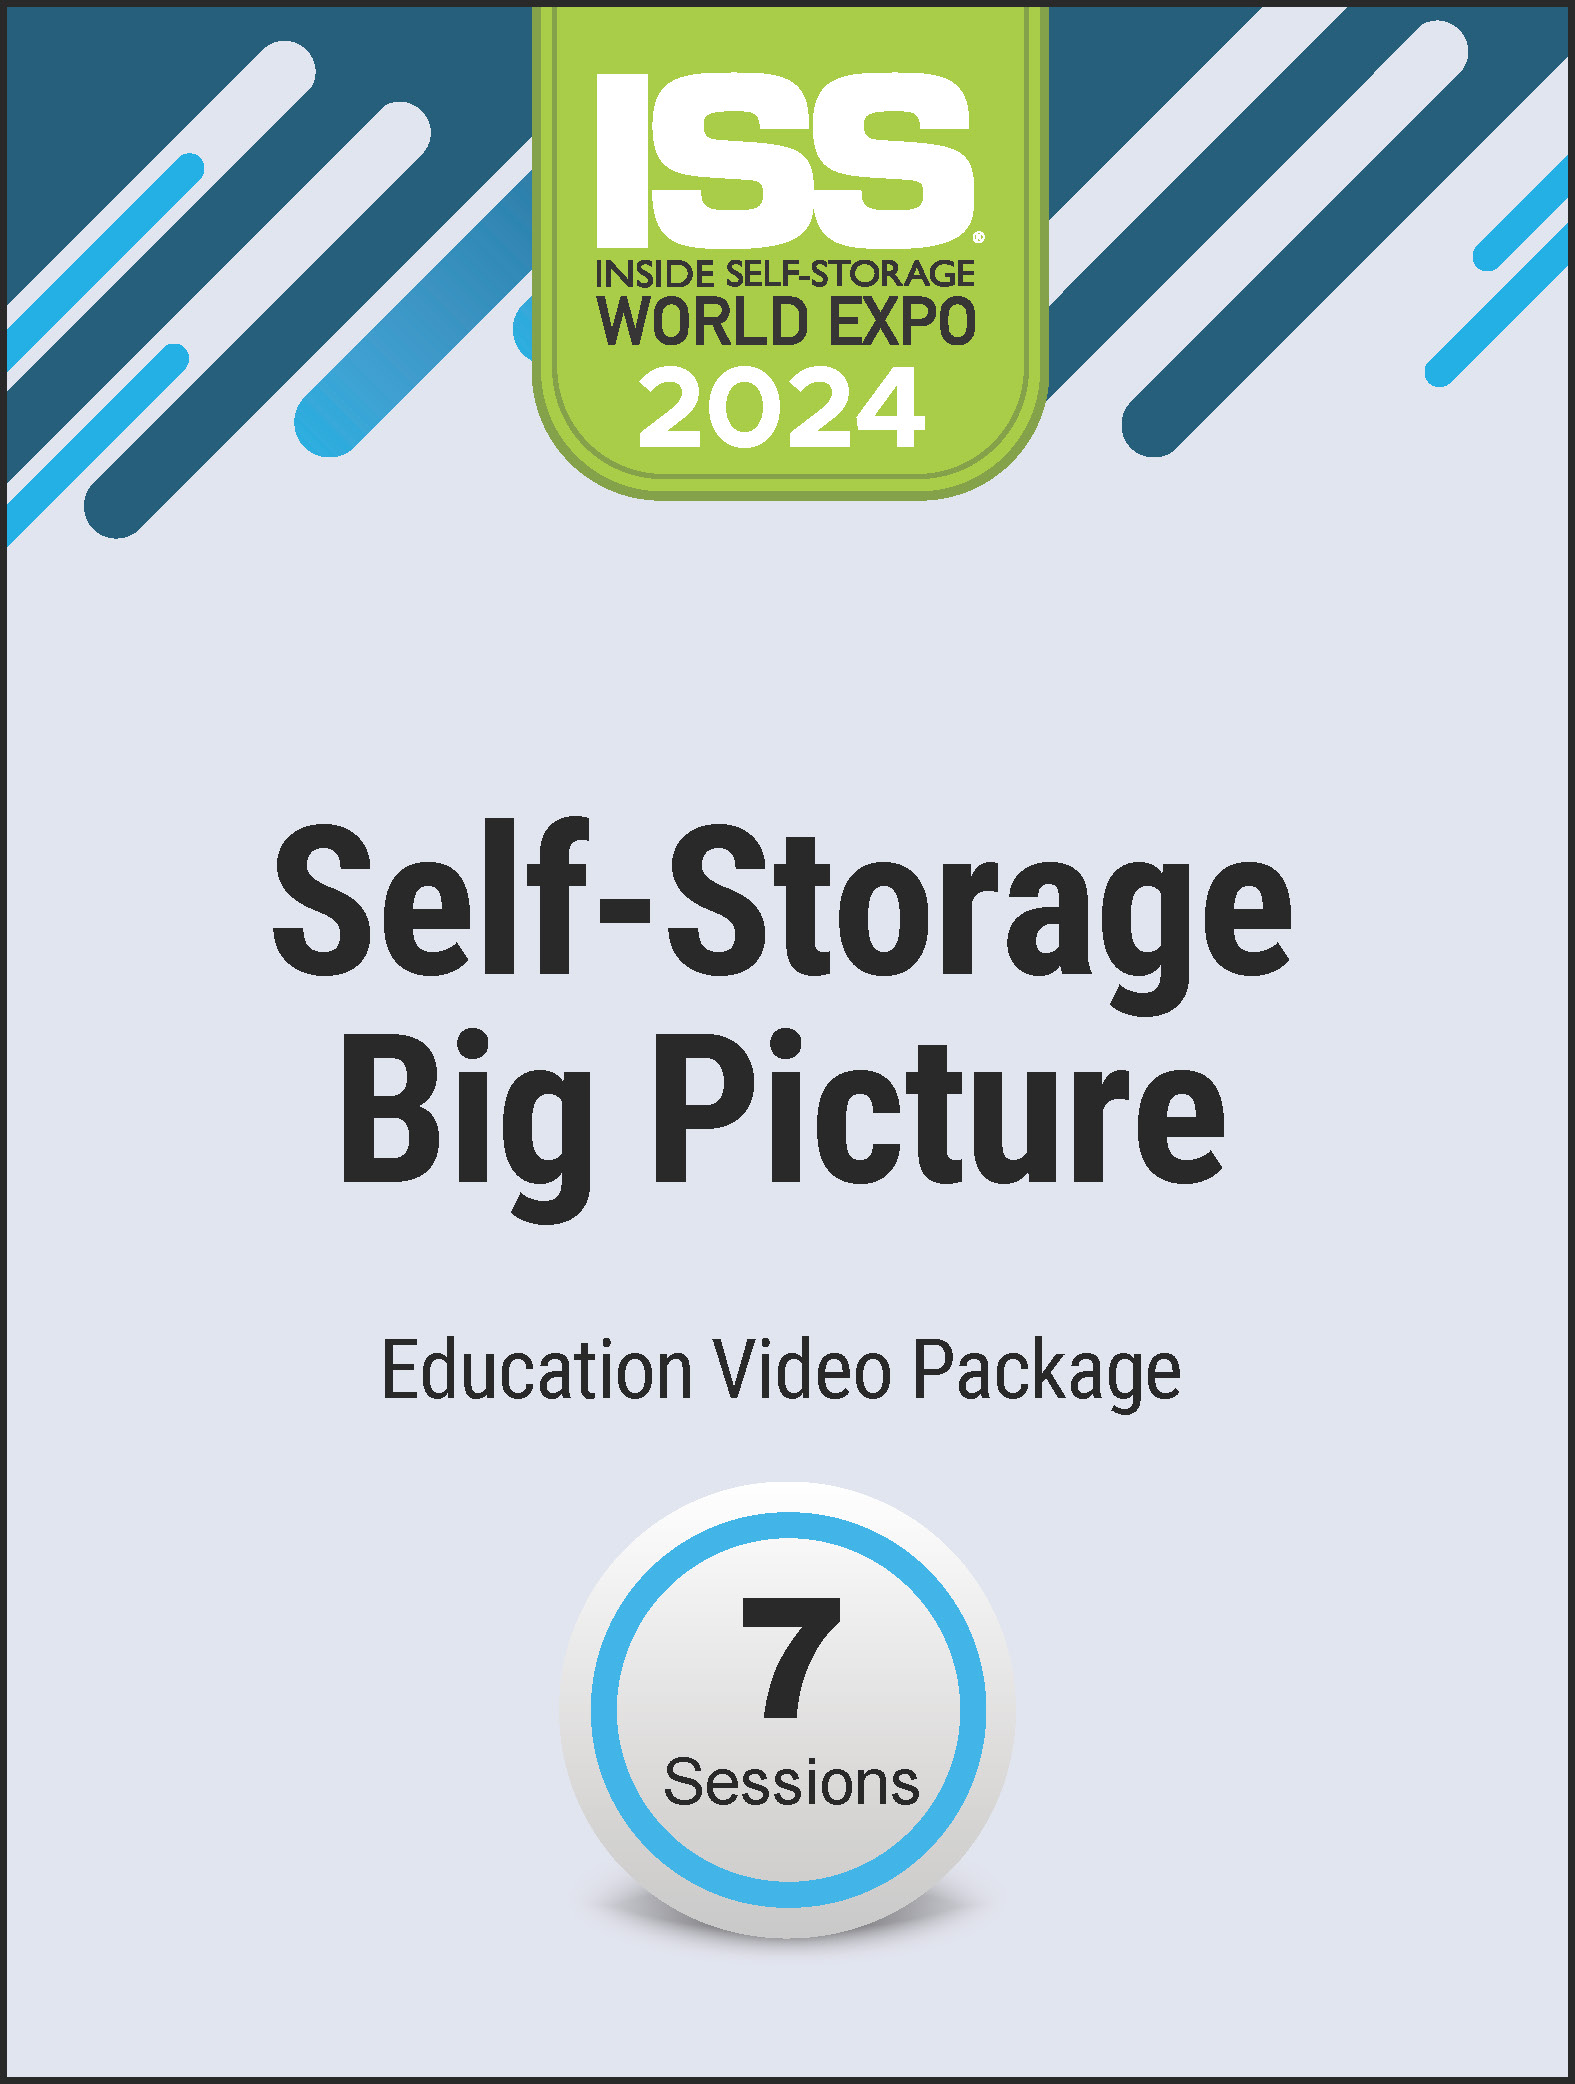 Video Pre-Order Sub - Self-Storage Big Picture 2024 Education Video Package